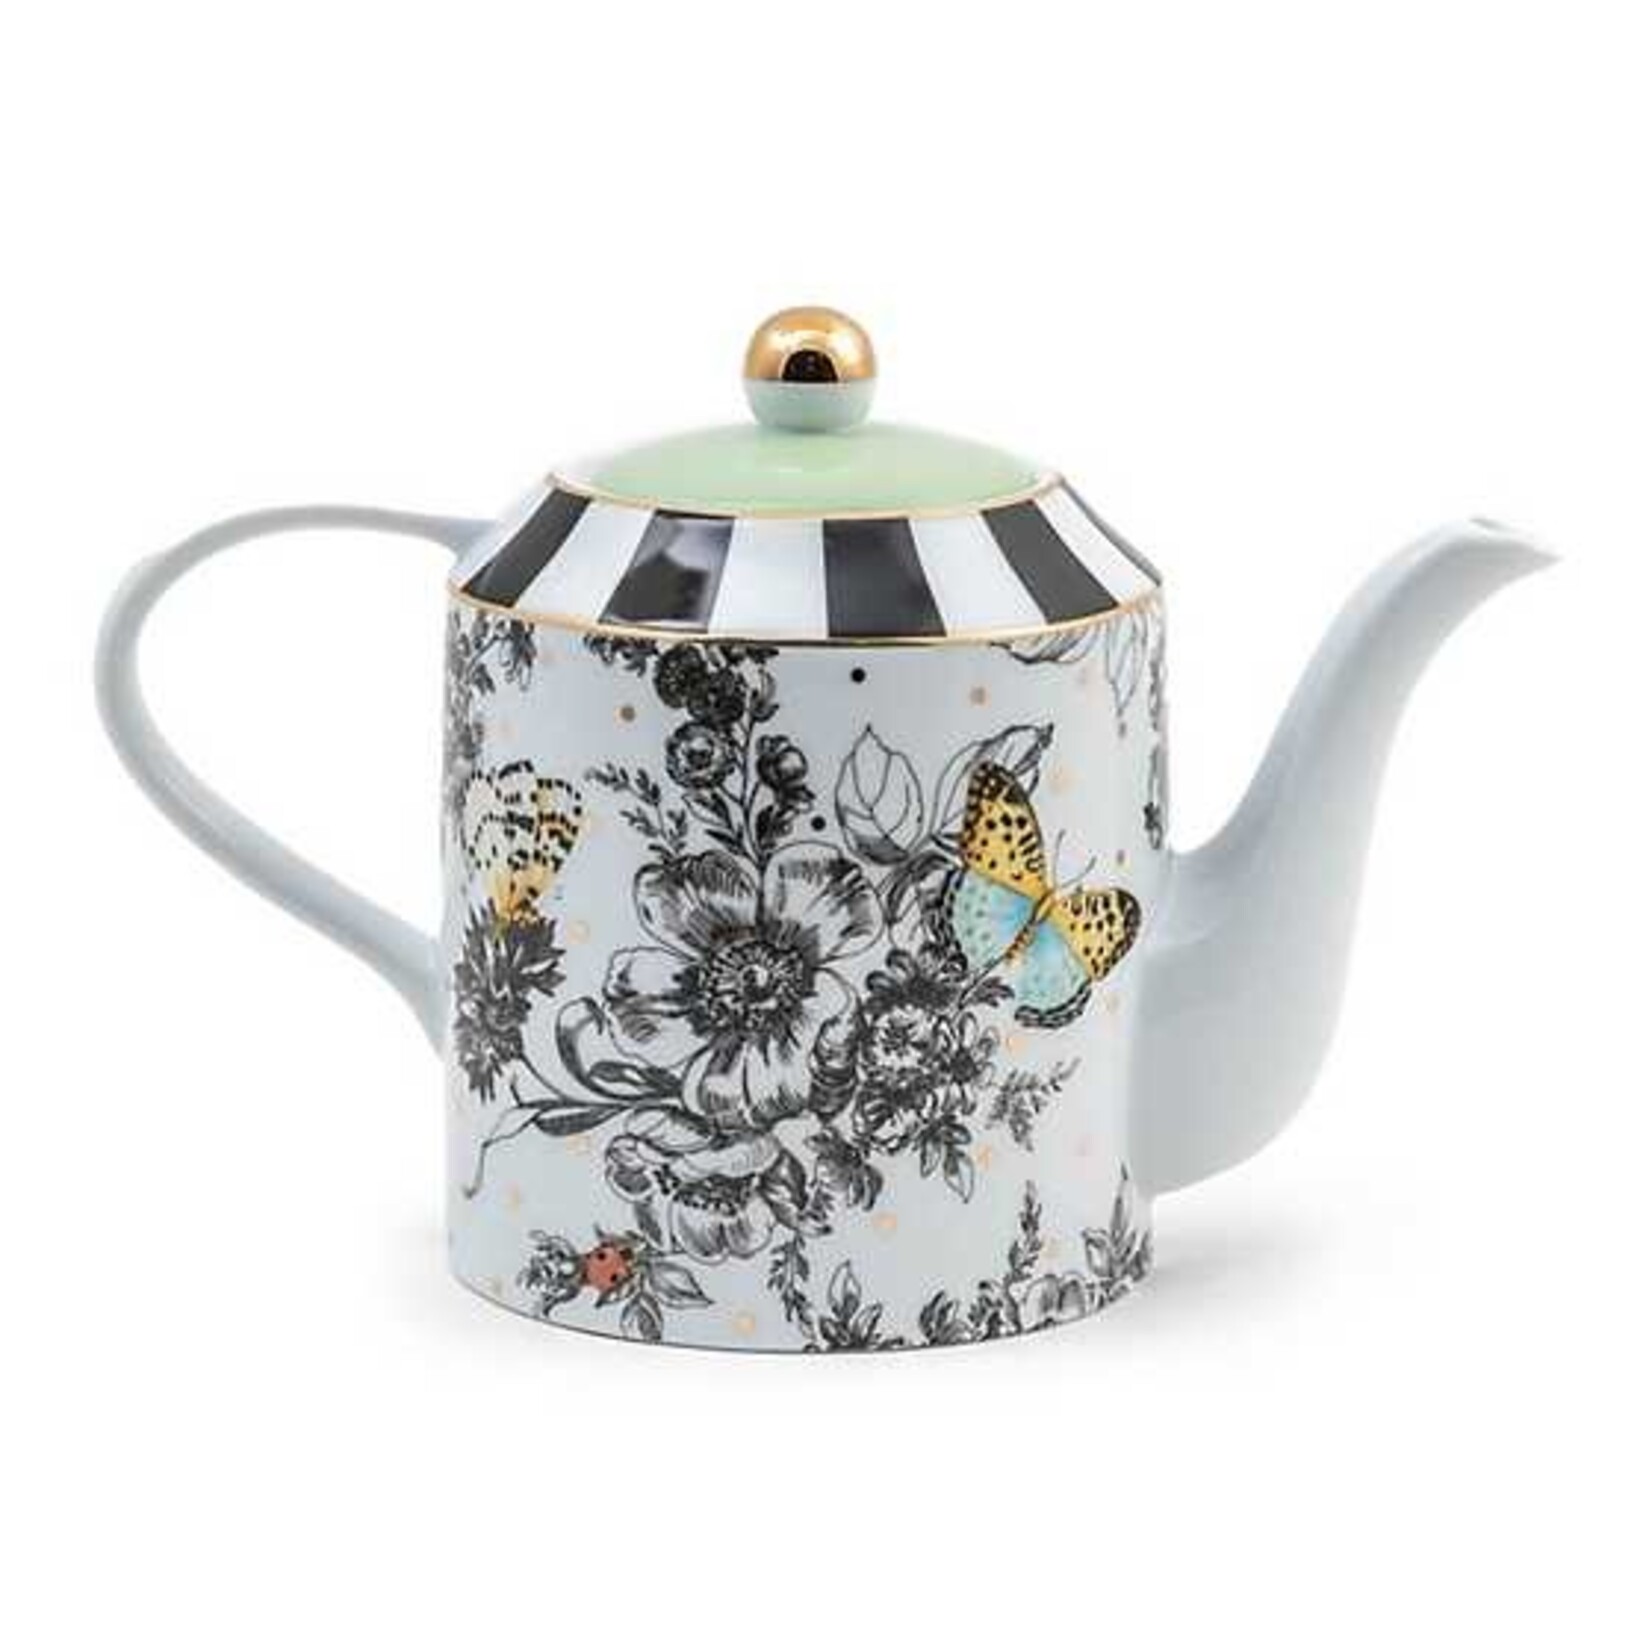 MacKenzie-Childs butterfly toile teapot